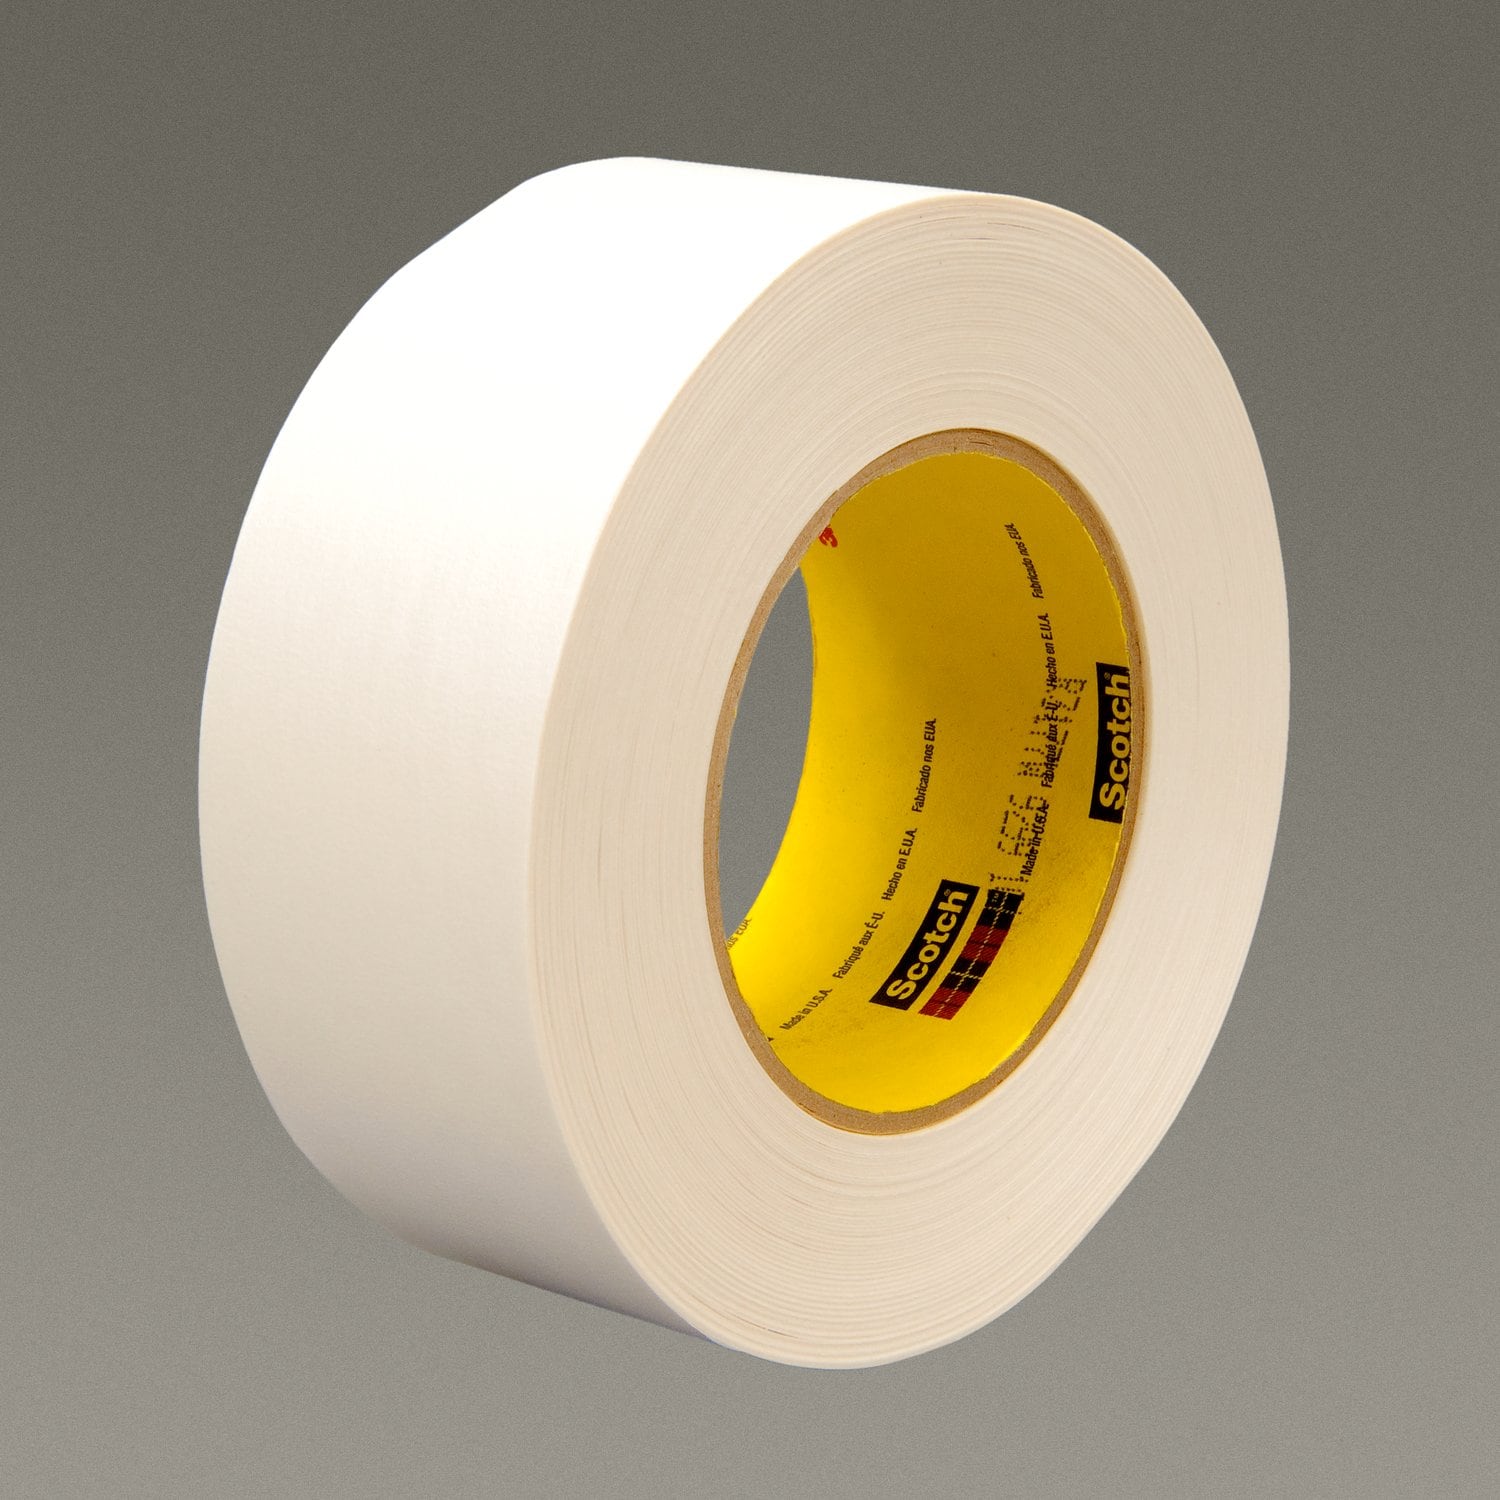 7100028047 - 3M Repulpable Strong Single Coated Tape R3187, White, 18 mm x 55 m, 7.5
mil, 48 rolls per case